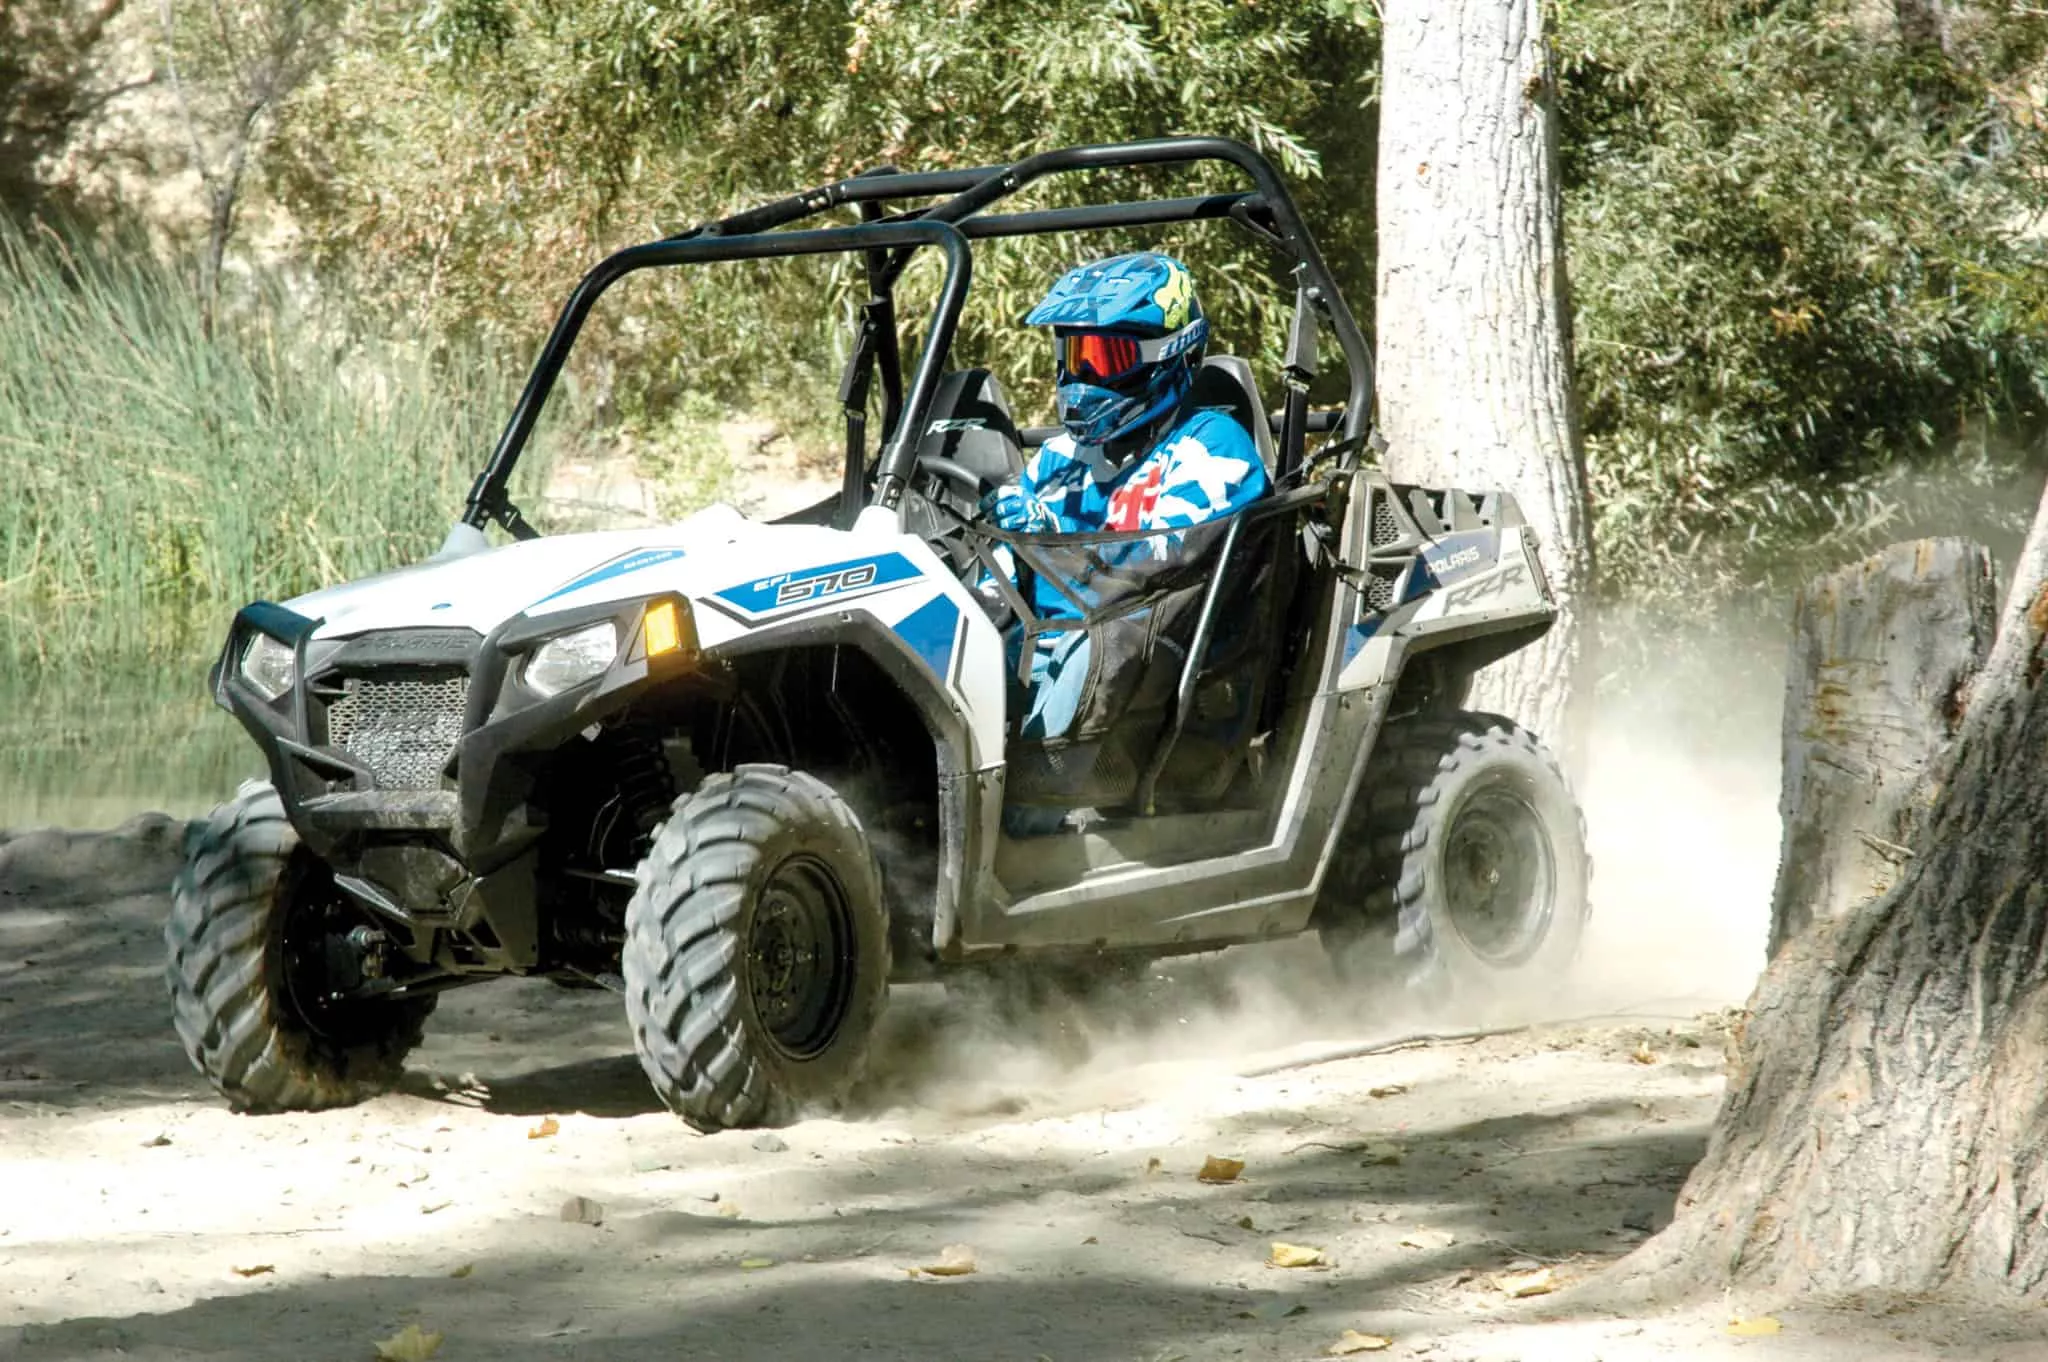 North Country ATV Trail Head Parking in USA, North America | ATVs - Rated 0.8